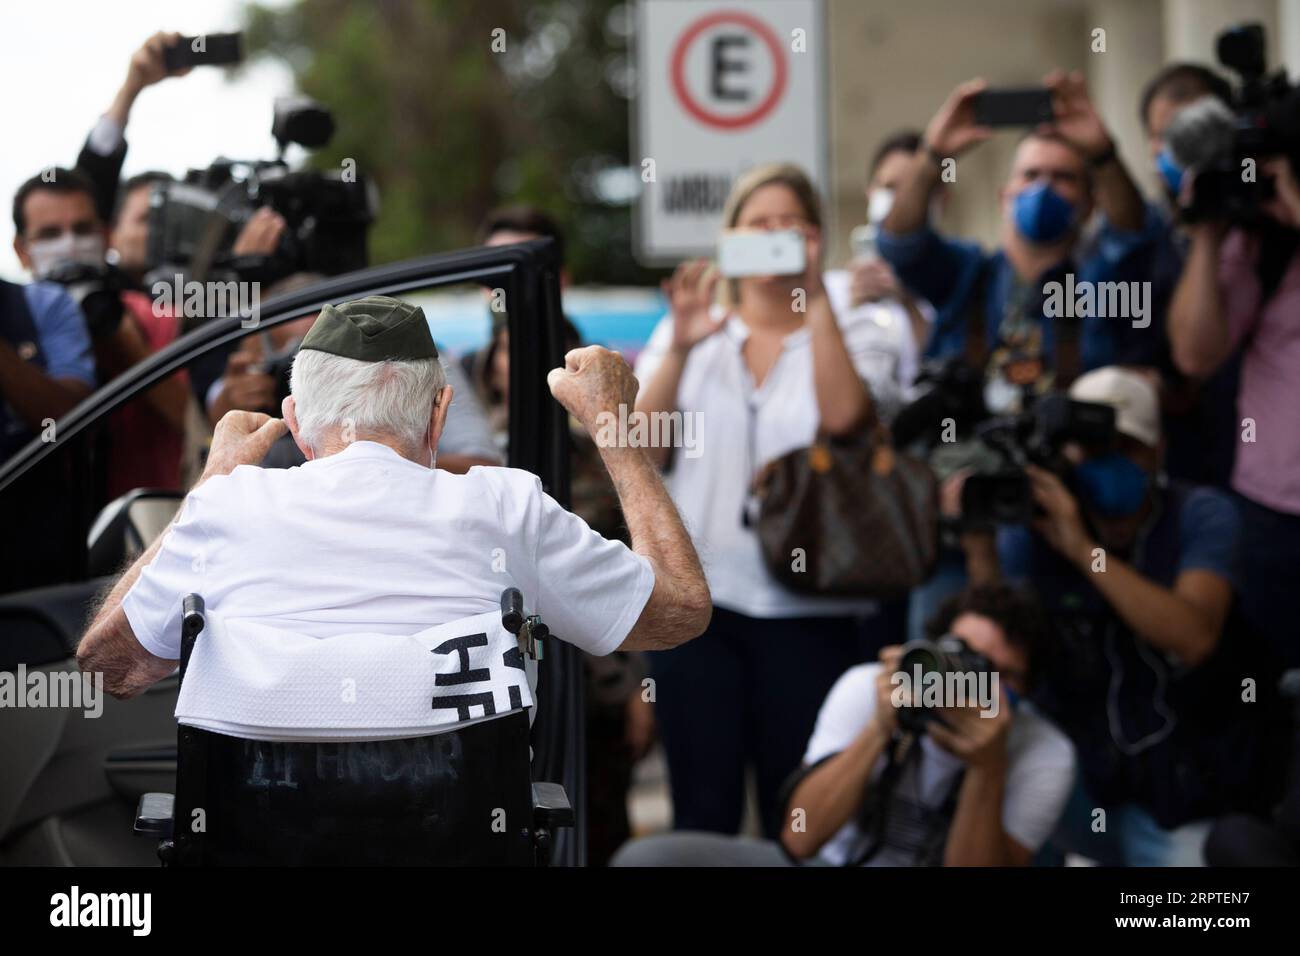 200415 -- BRASILIA, April 15, 2020 Xinhua -- Ernando Piveta front, a 99-year-old Brazilian World War II veteran, is discharged from the Armed Forces Hospital after recovering from the COVID-19 in Brasilia, Brazil, April 14, 2020. Ernando Piveta, who had been a member of the Brazilian Expeditionary Force, was admitted to the hospital on April 6 and treated in the facility s COVID ward after testing positive for the virus, the Defense Ministry said. Born on Oct. 7, 1920, Piveta received the Medal of Victory from Brazil s President Jair Bolsonaro last year for his service to the nation. Photo by Stock Photo